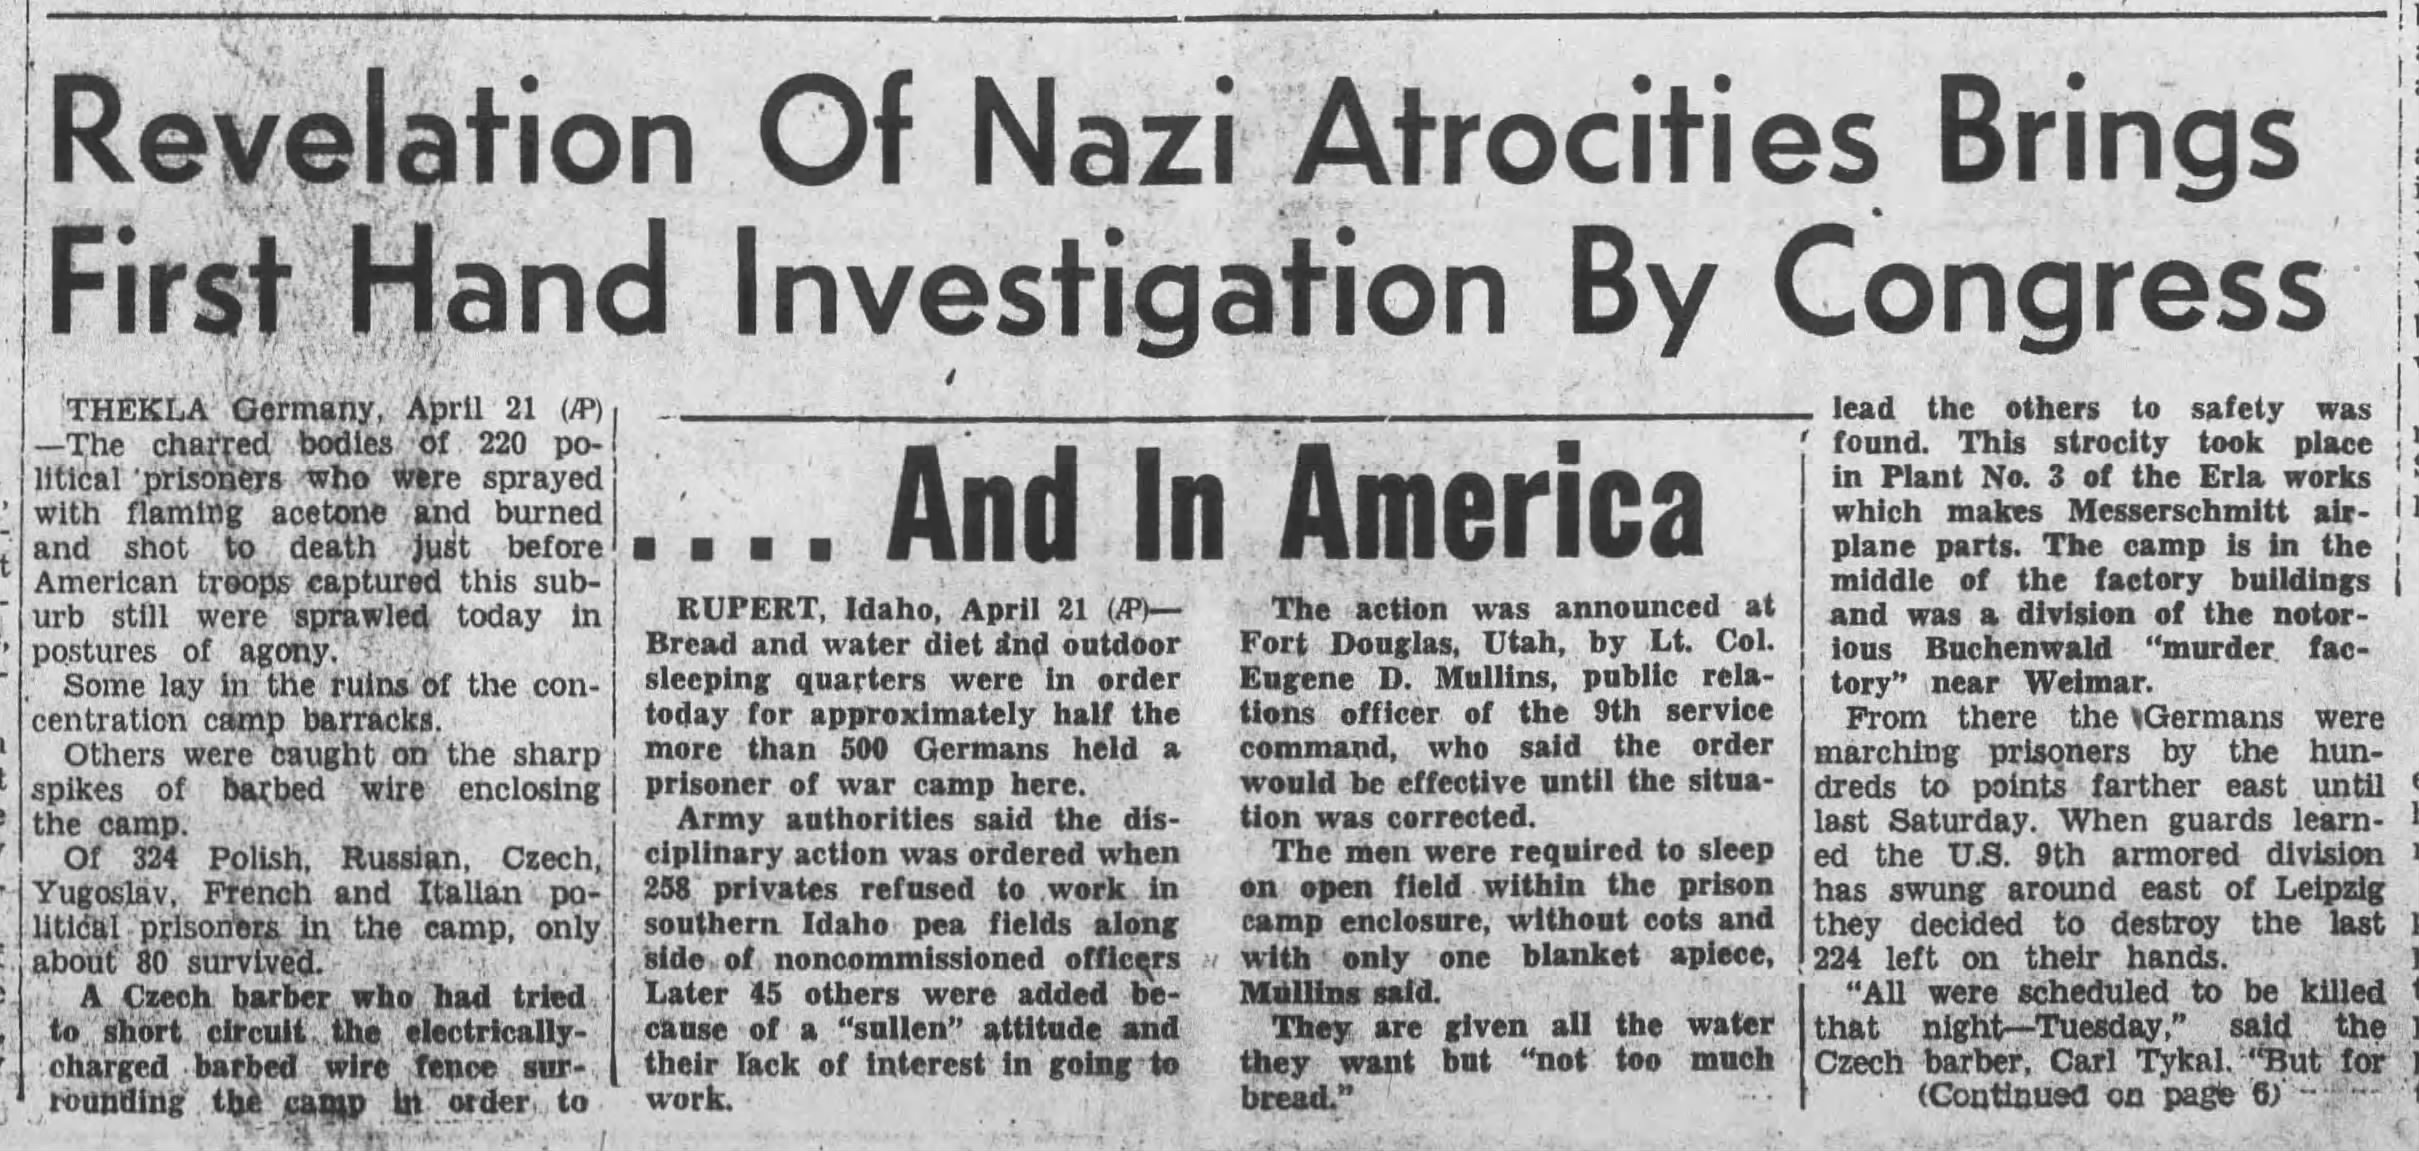 Revelation Of Nazi Atrocities Brings First Hand Investigation By Congress